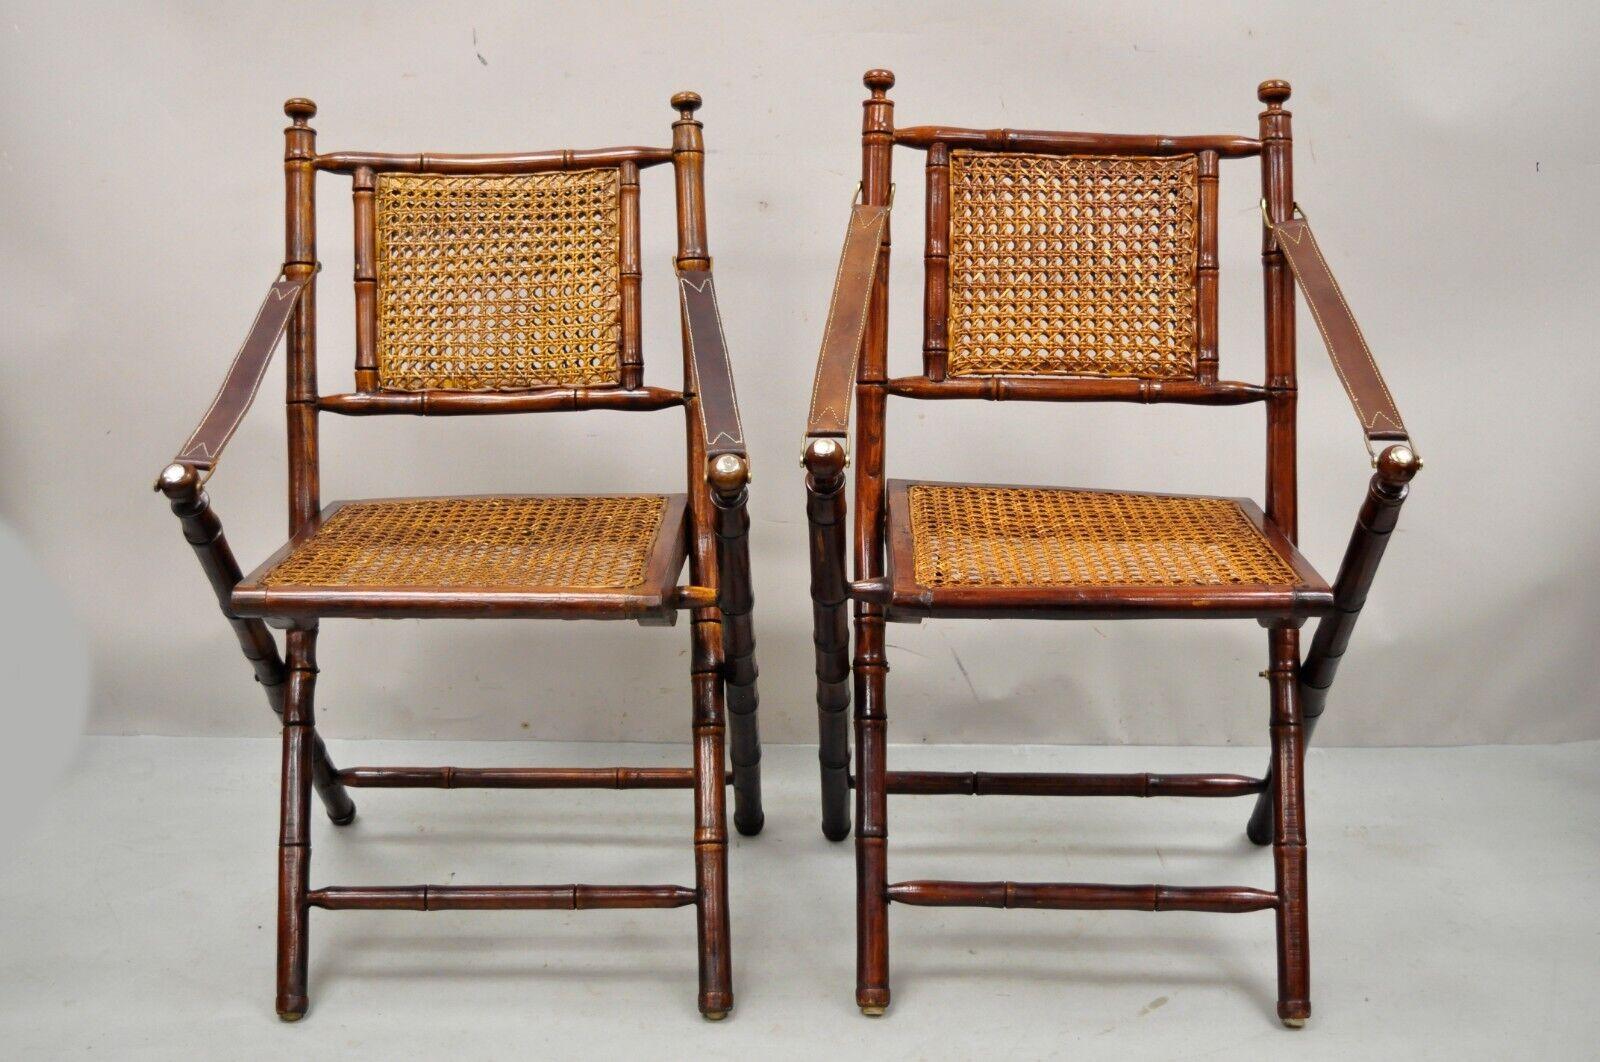 English Campaign Style Carved Wood Bamboo Folding Sling Arm Chairs with cane - a Pair. Item features cane back and seat, leather sling arms, folding design, solid wood frames, distressed finish, great style and form. Circa late 20th Century - Early